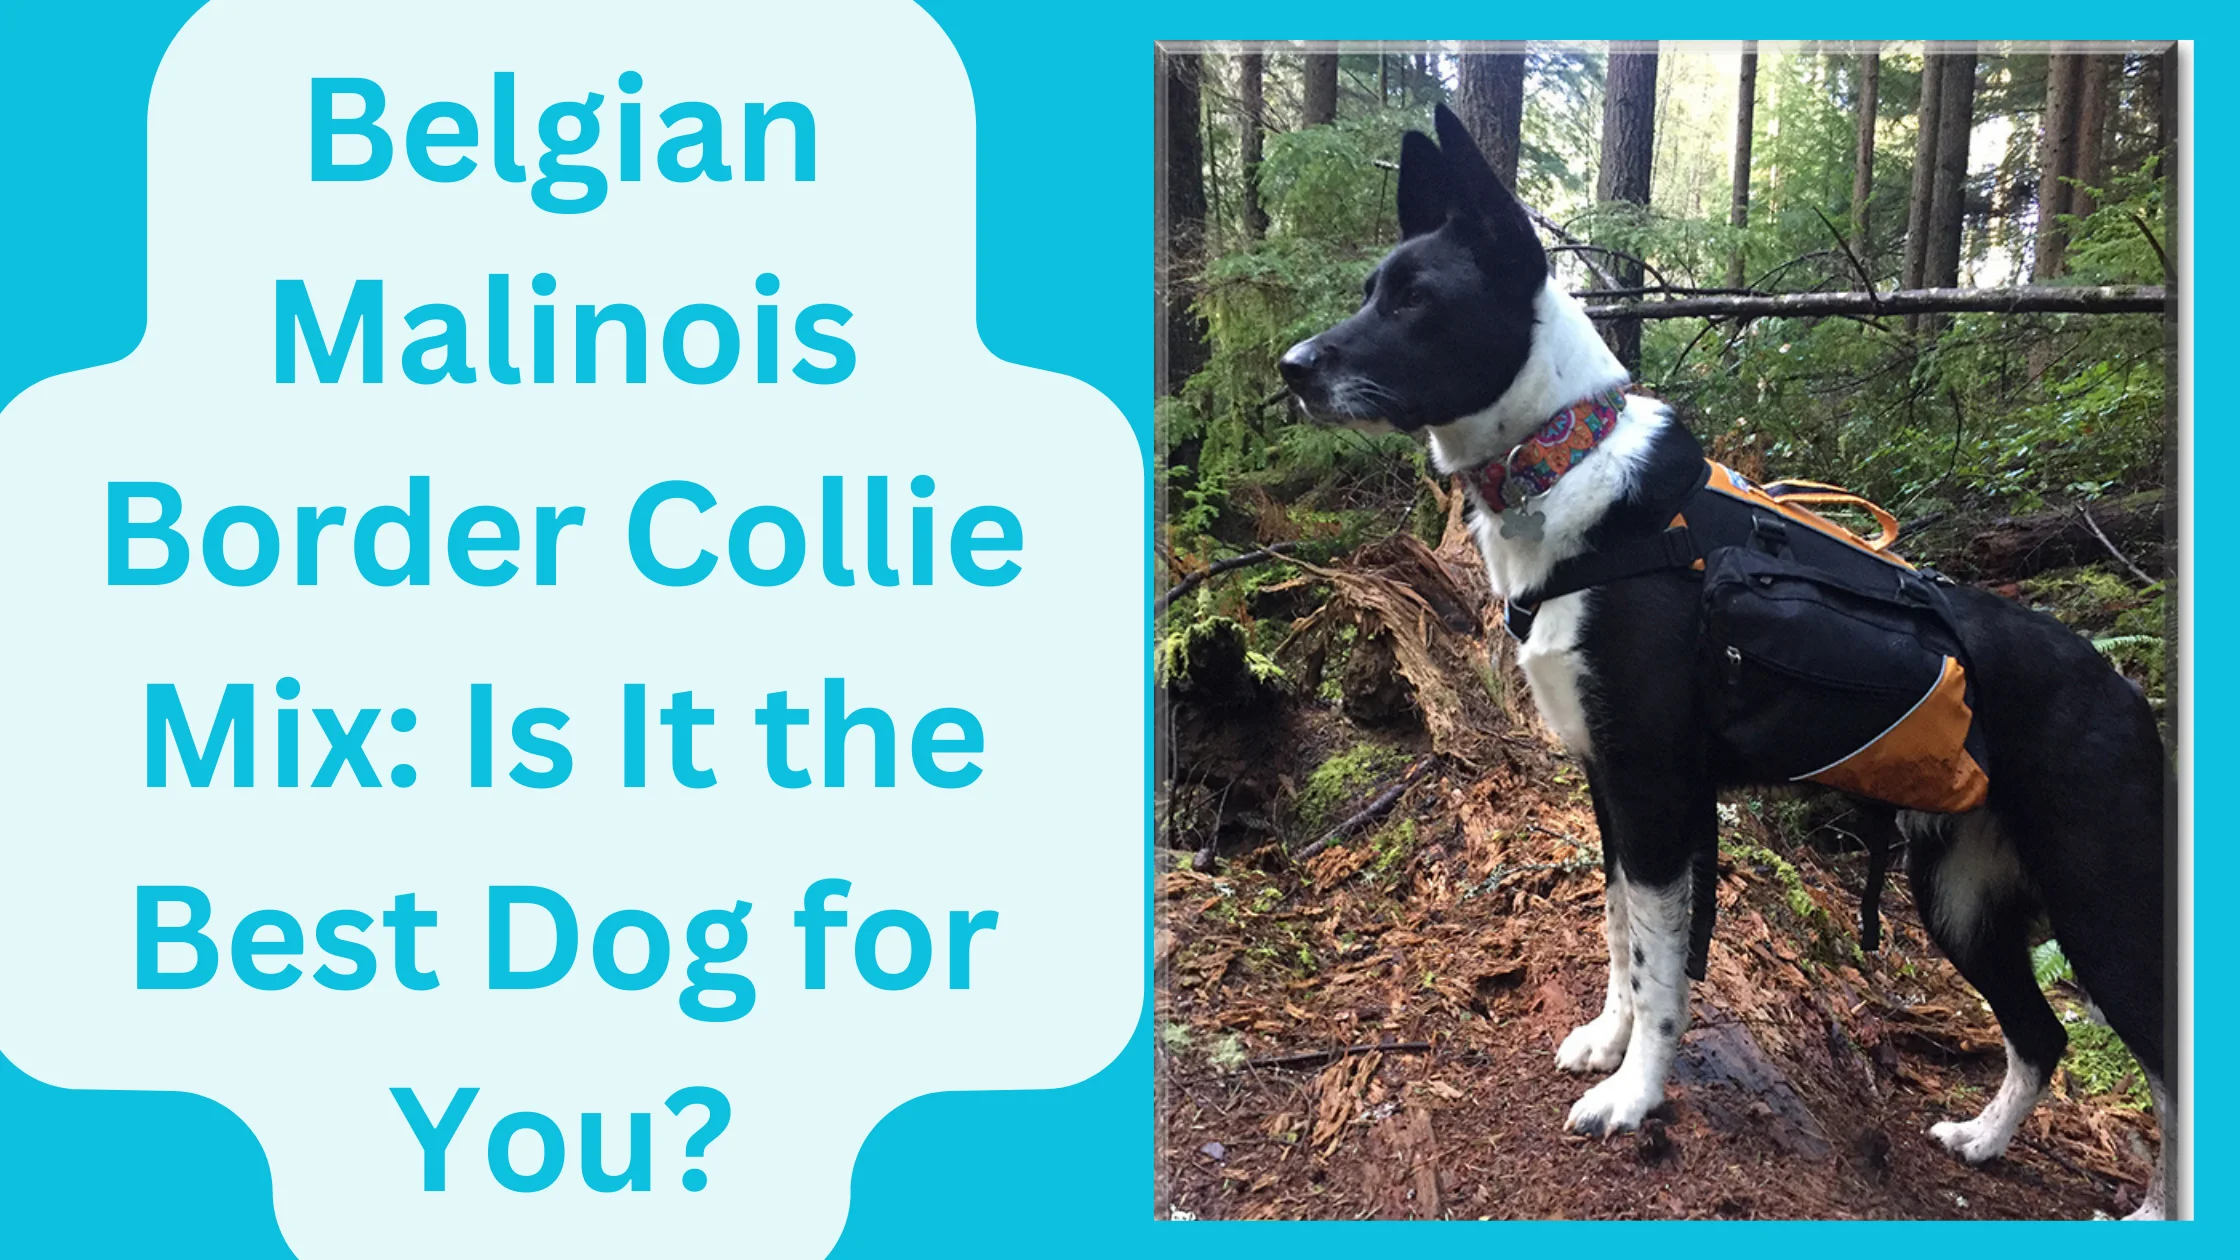 Belgian Malinois Border Collie Mix: Is It the Best Dog for You?